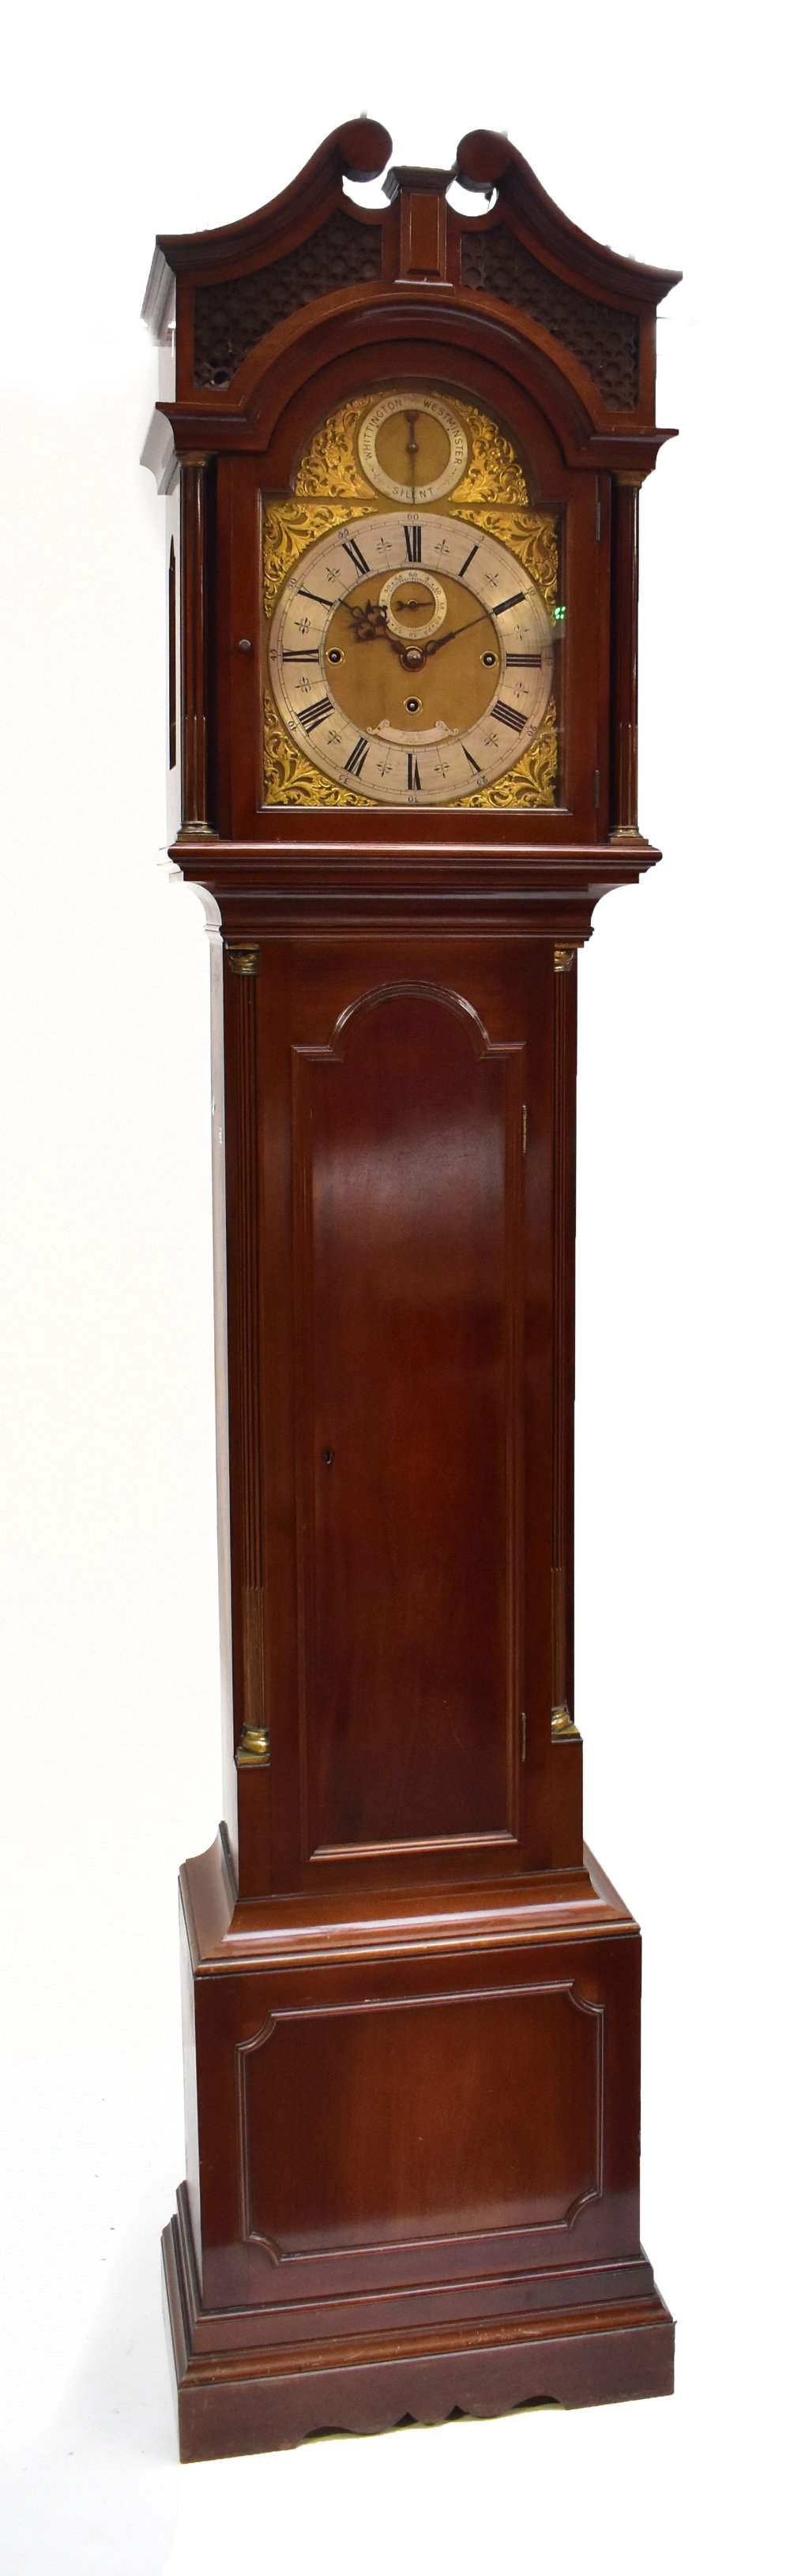 WEIR & SONS OF NOTTINGHAM; a mahogany cased longcase clock, the brass face with silvered dial,